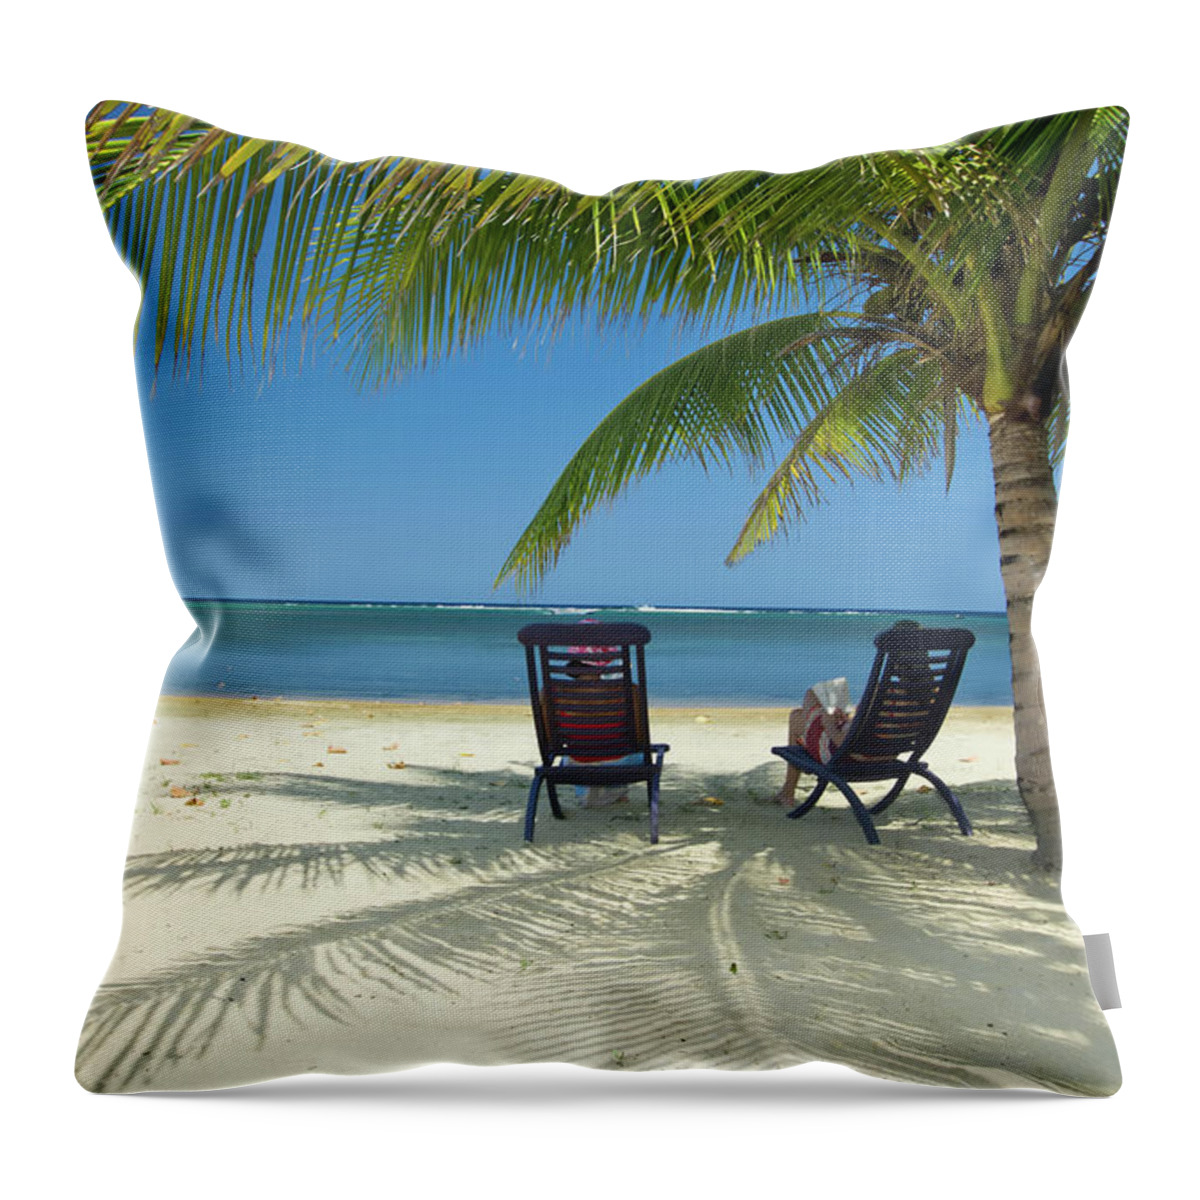 Water's Edge Throw Pillow featuring the photograph Relaxing On Remote Beach by Dstephens